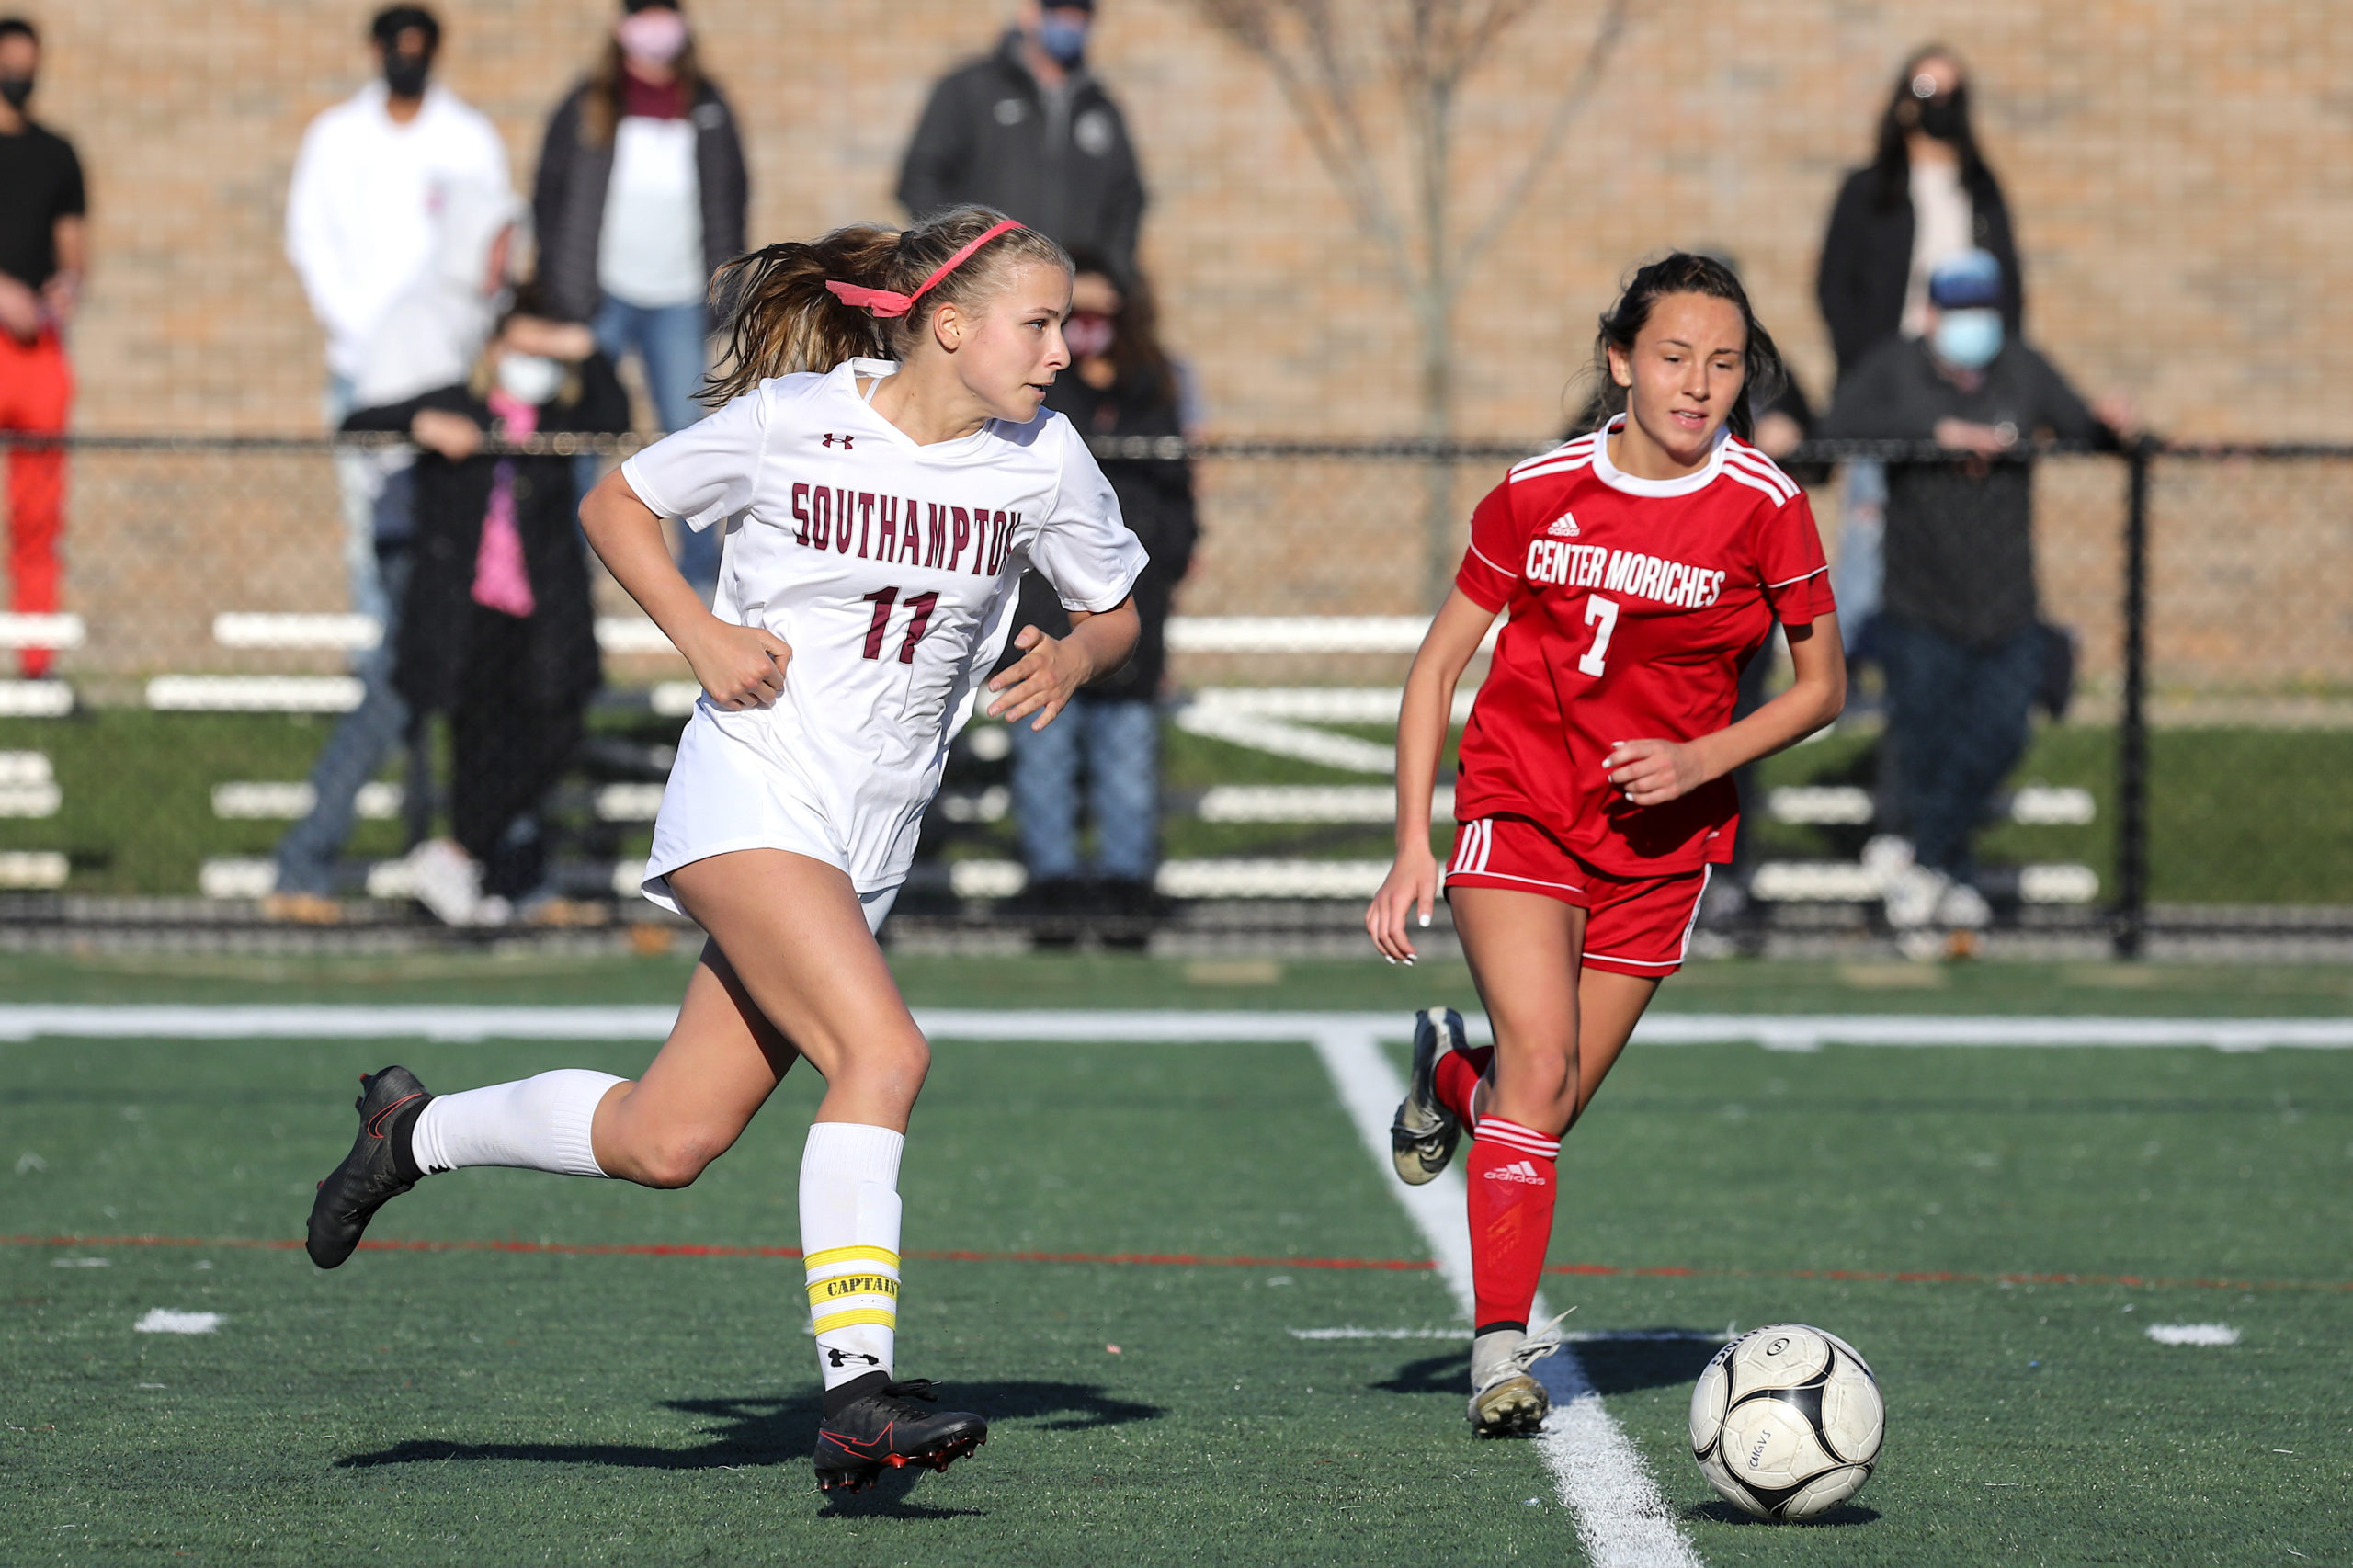 Southampton junior Charlotte Cardel dribbles the ball down the field.